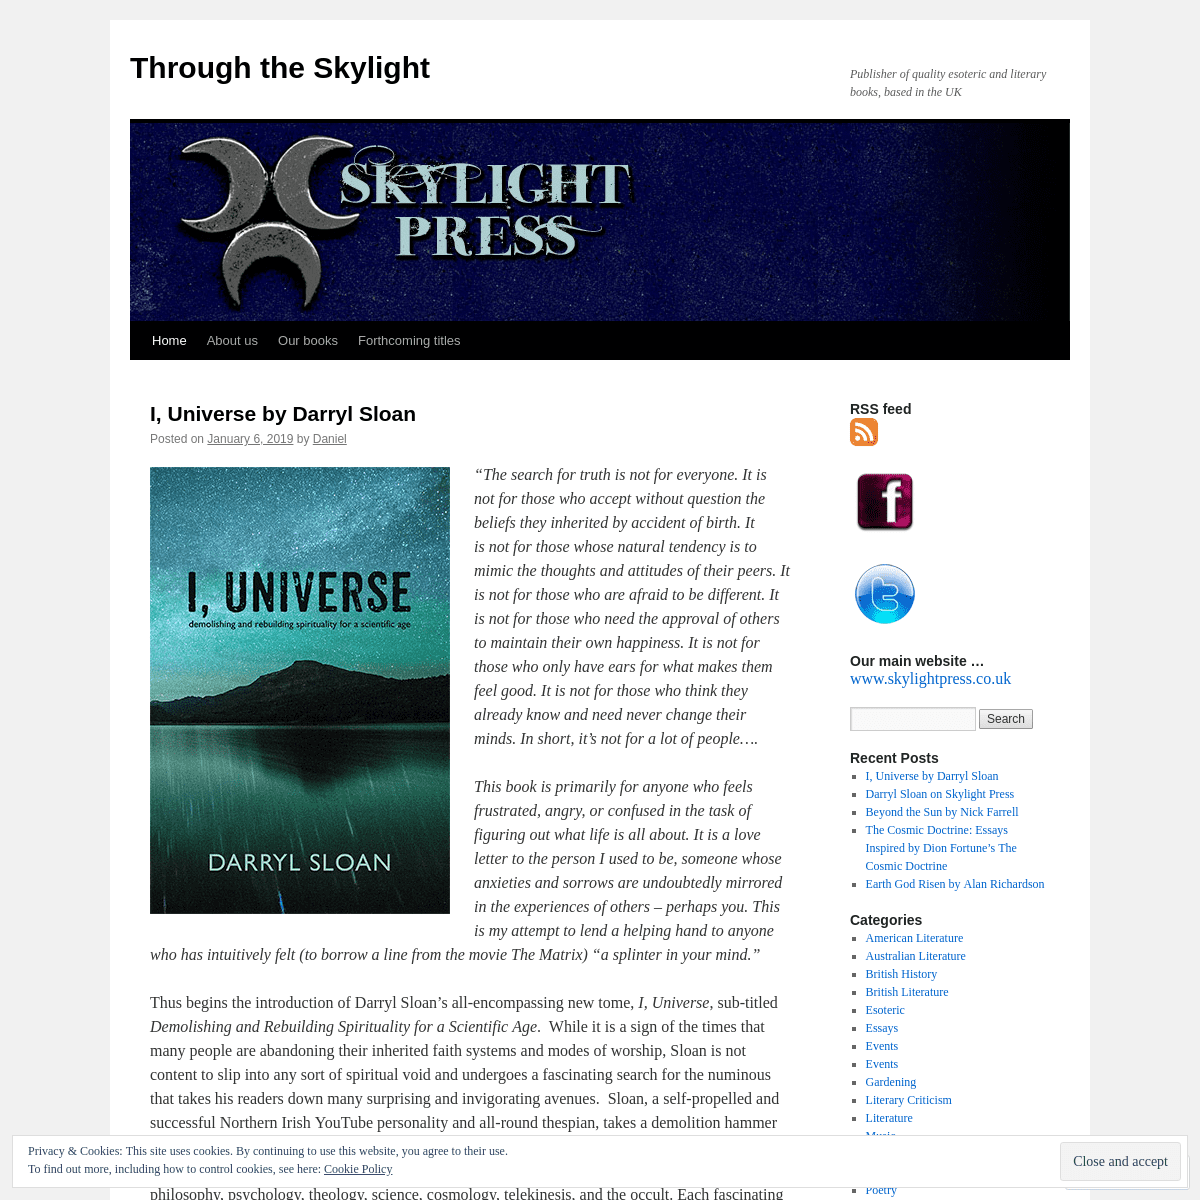 Through the Skylight | Publisher of quality esoteric and literary books, based in the UK